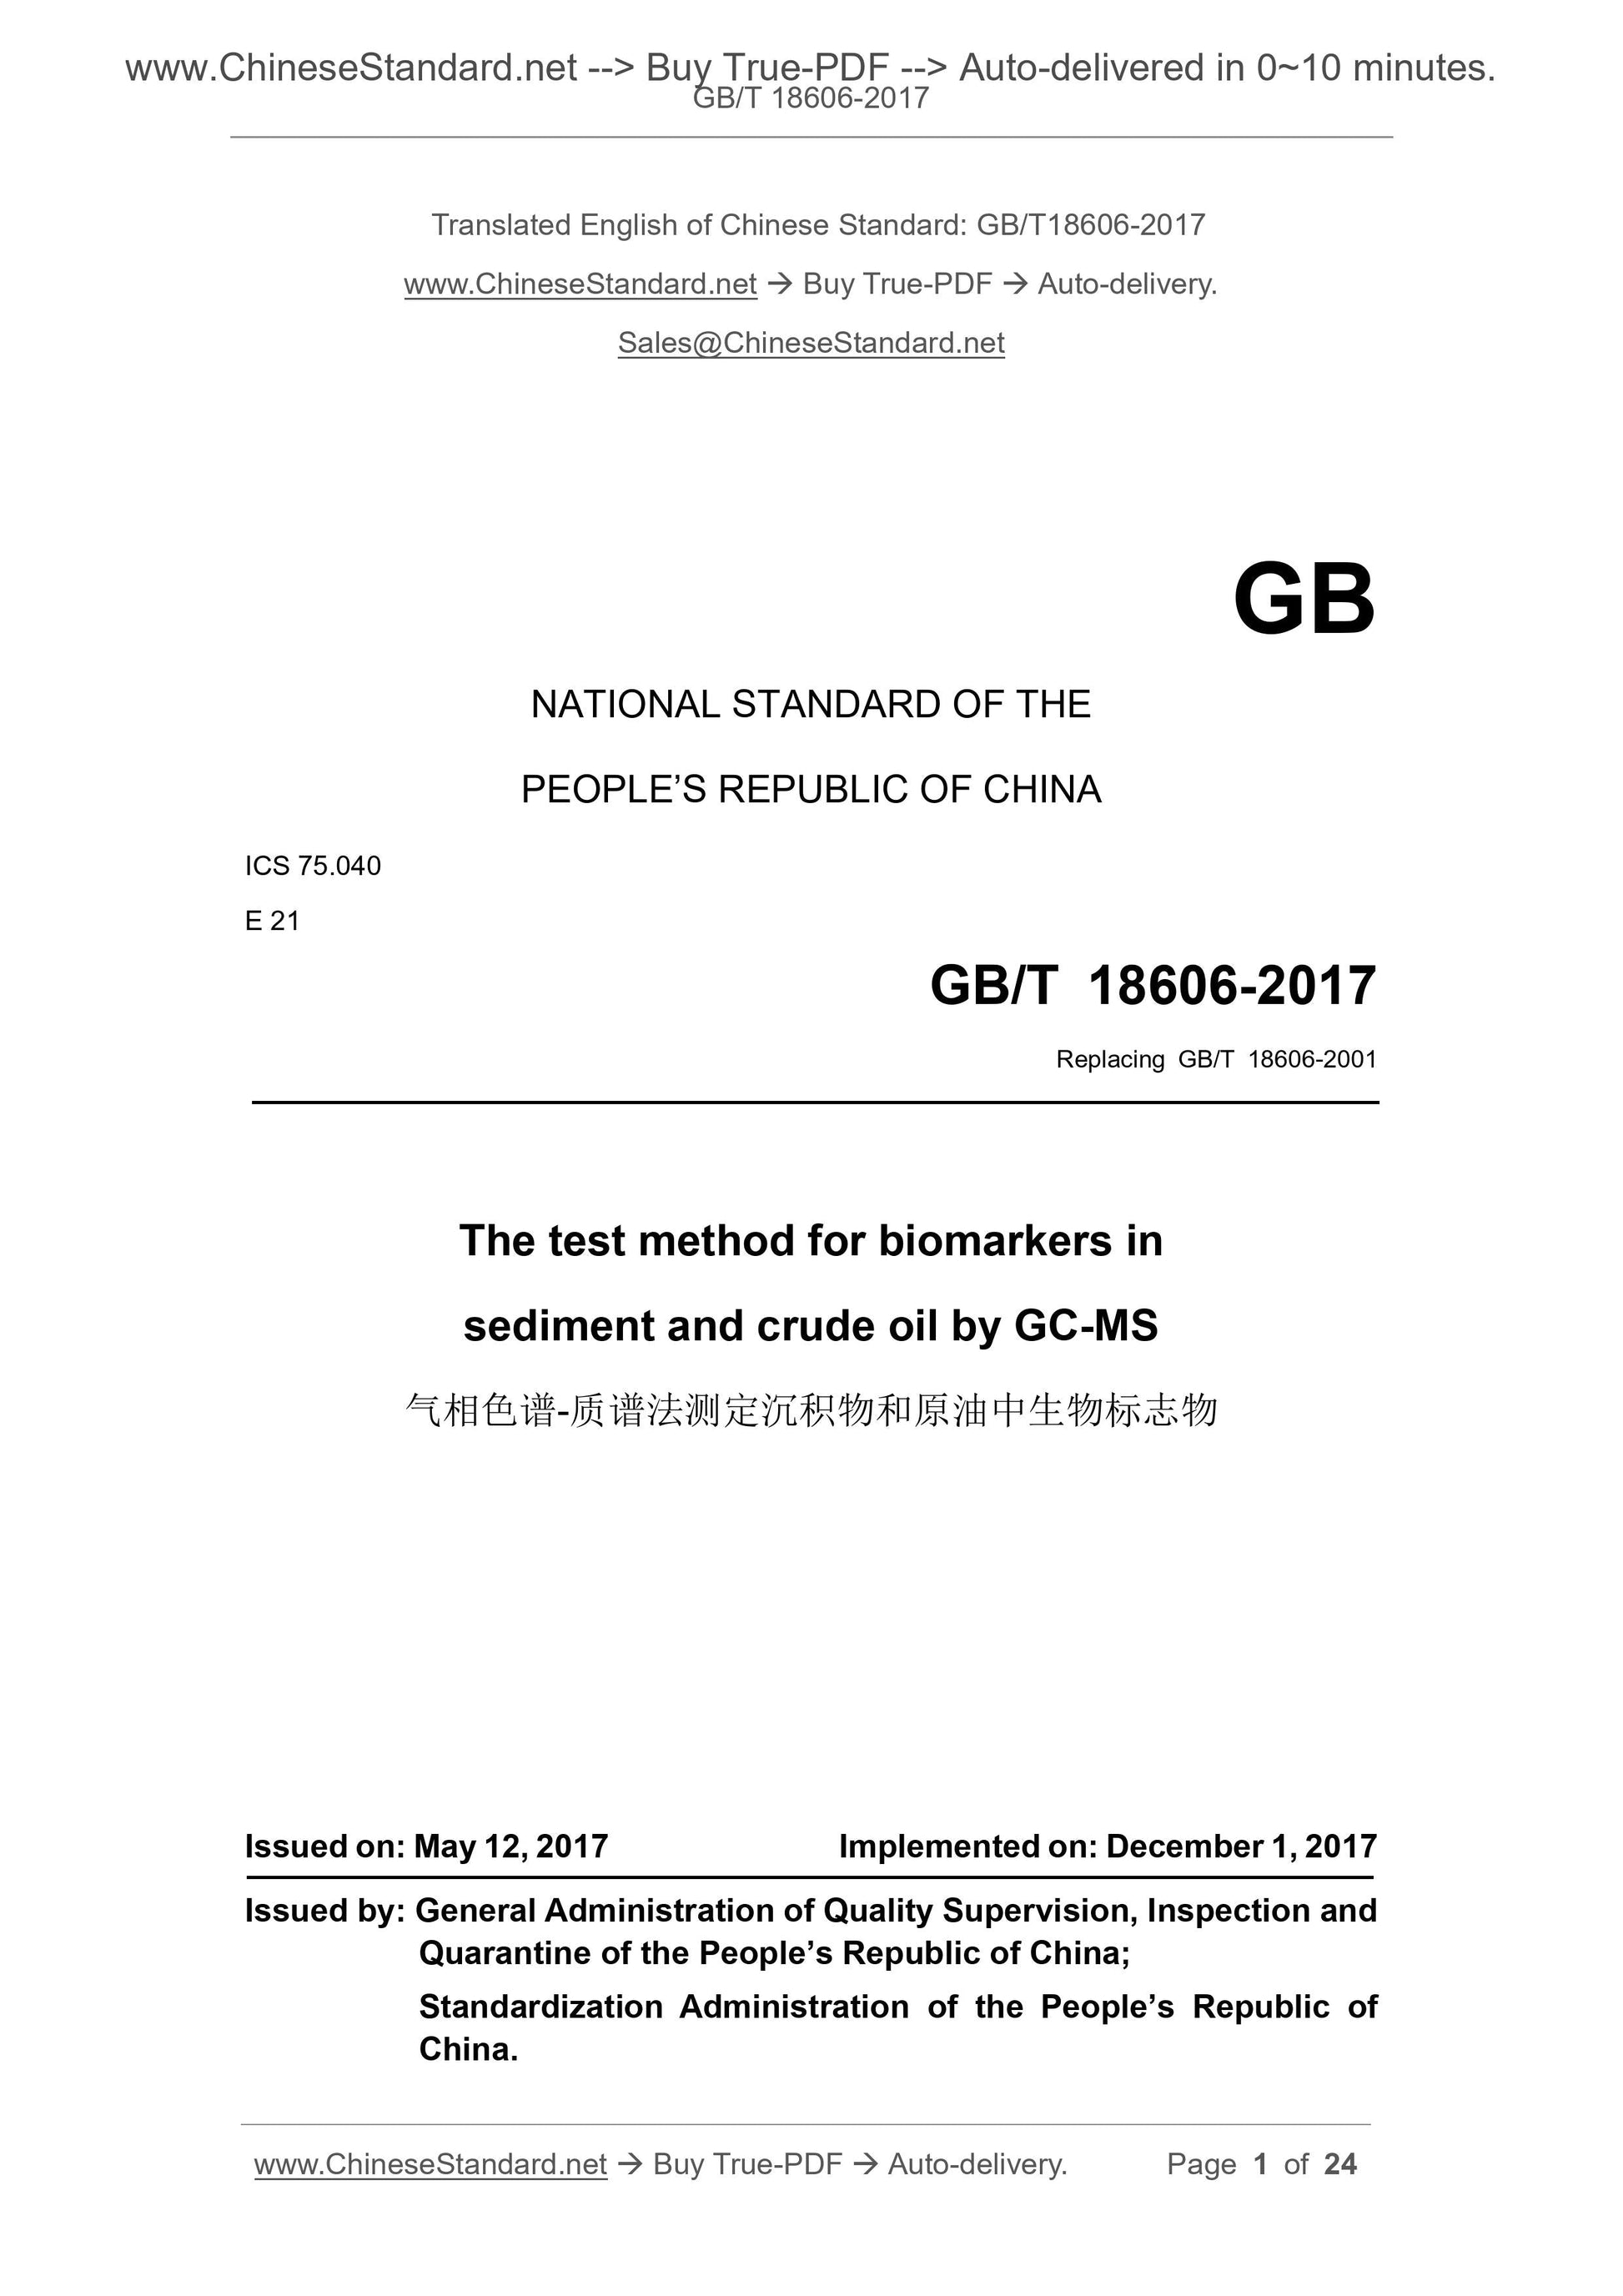 GB/T 18606-2017 Page 1